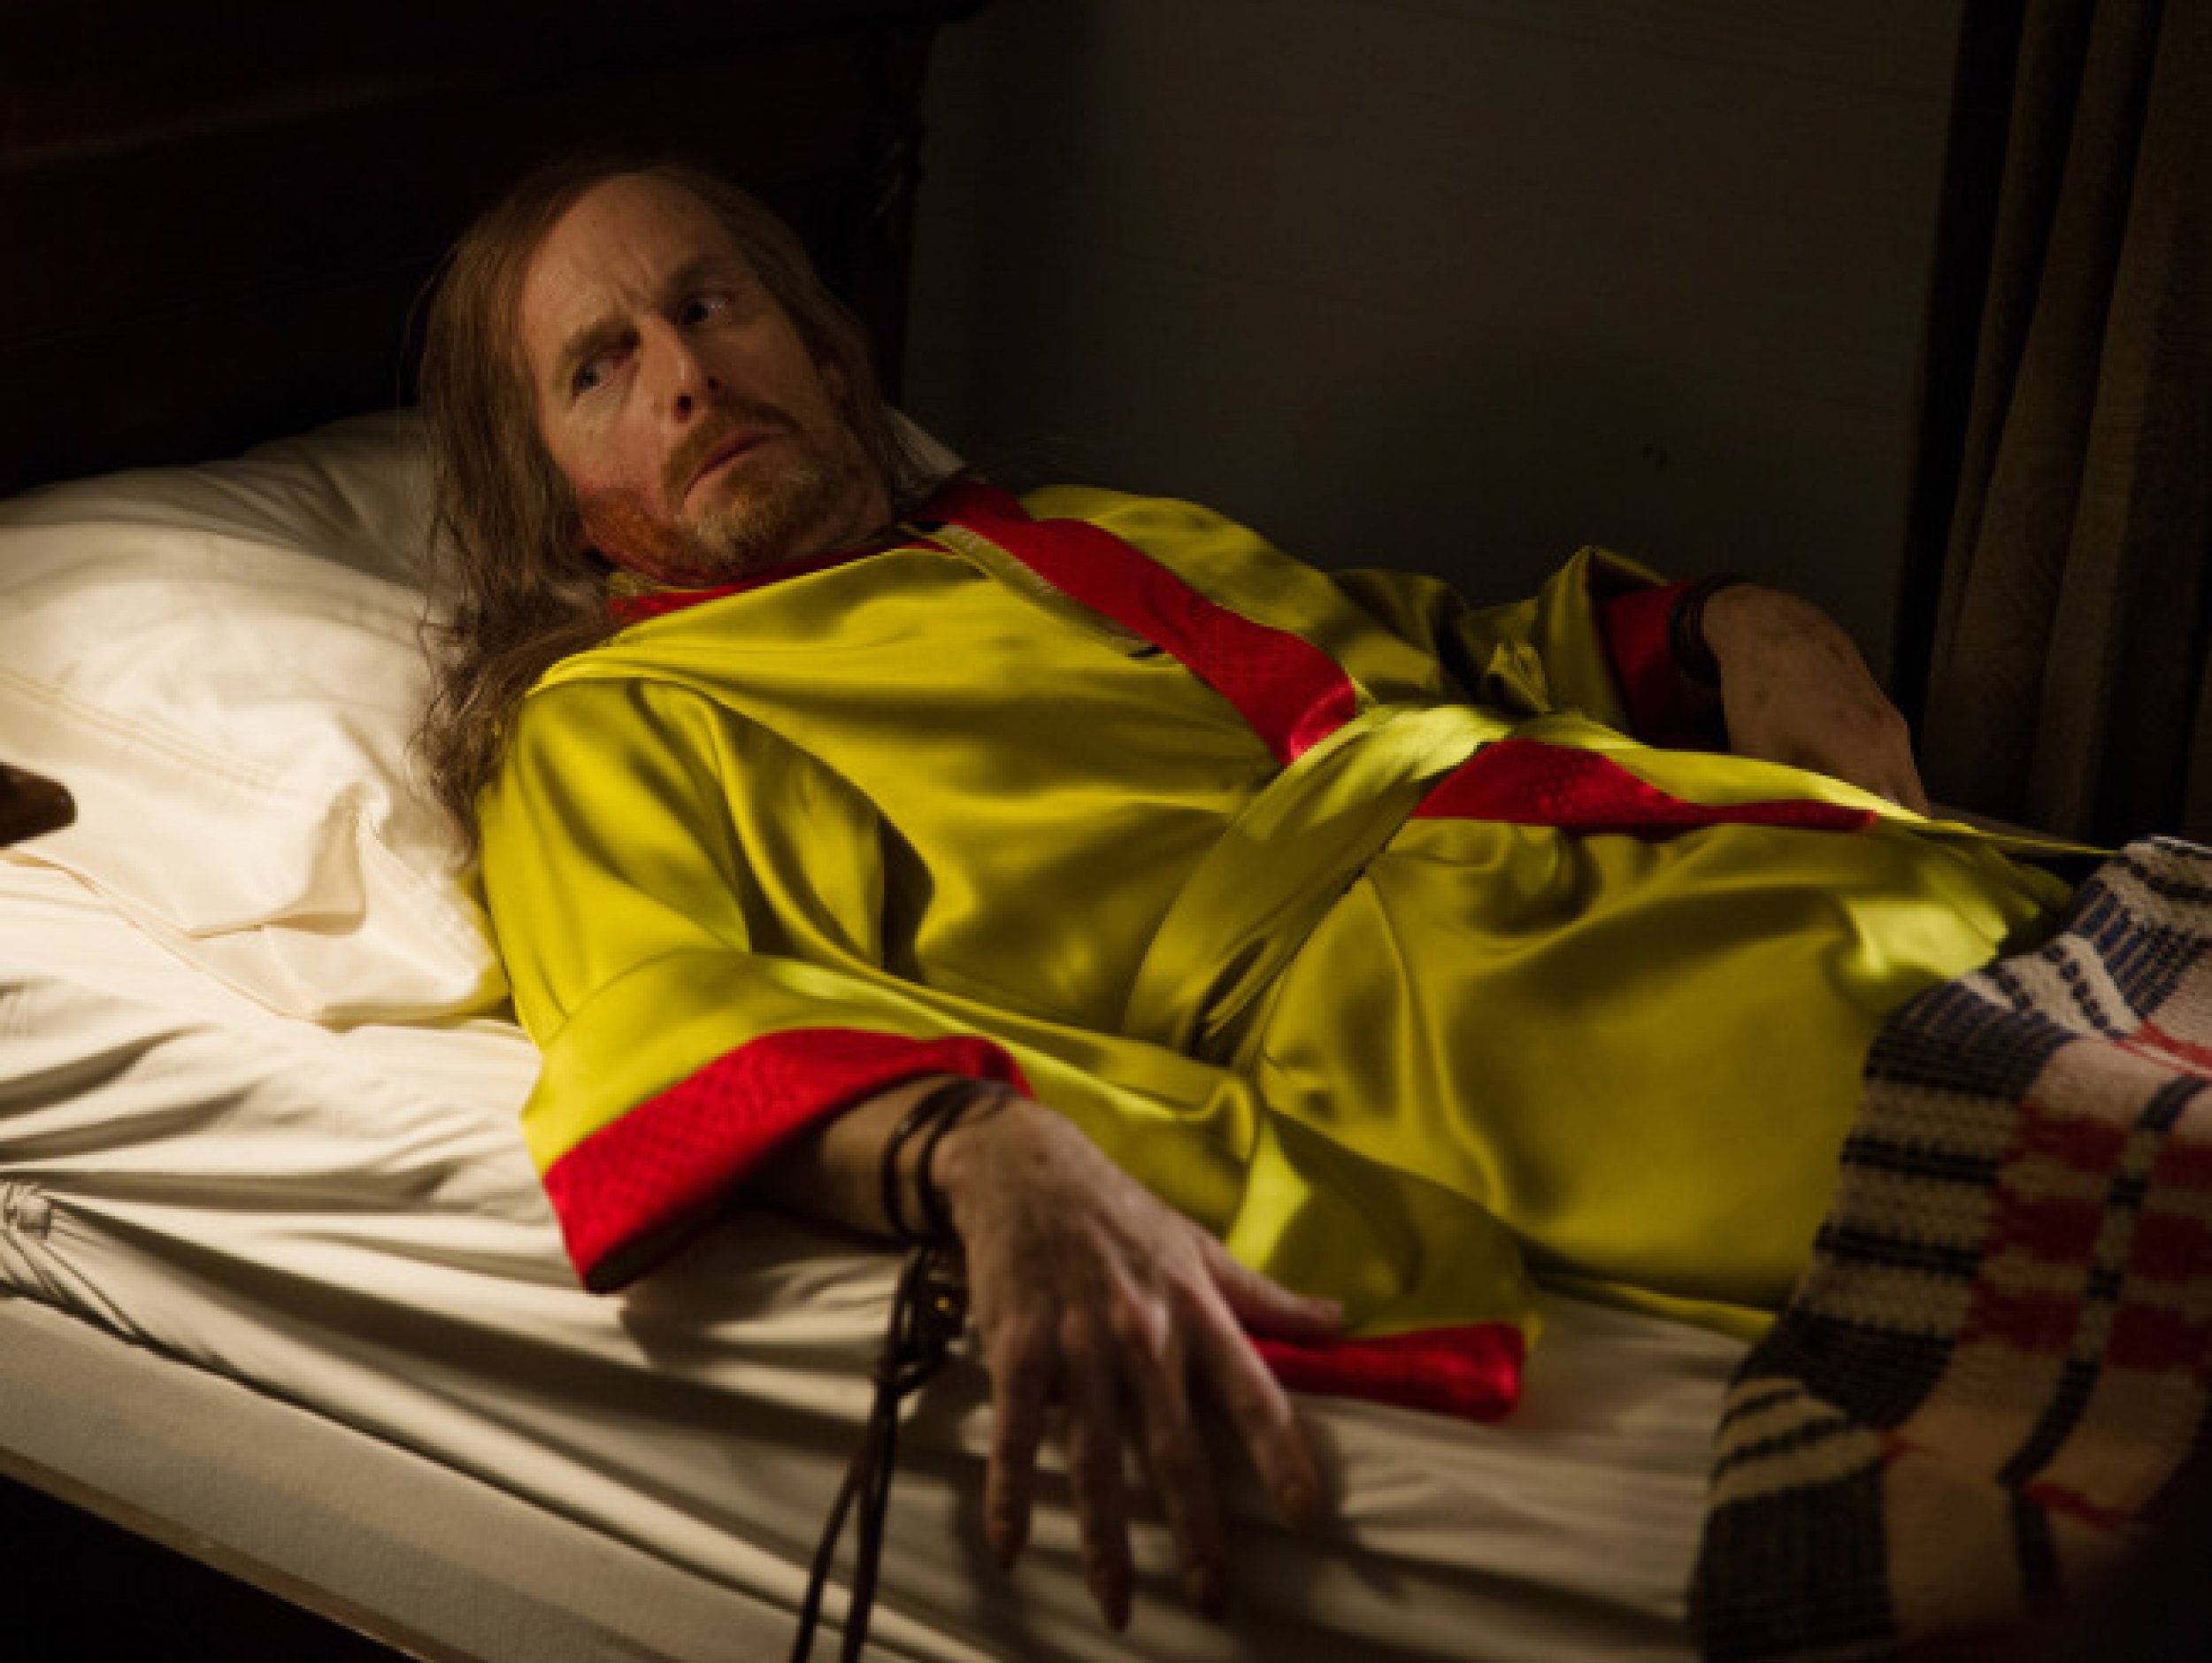 ‘american Horror Story’ Season 3 Spoilers 9 Most Disturbing Scenes From Coven Episode 7 ‘the